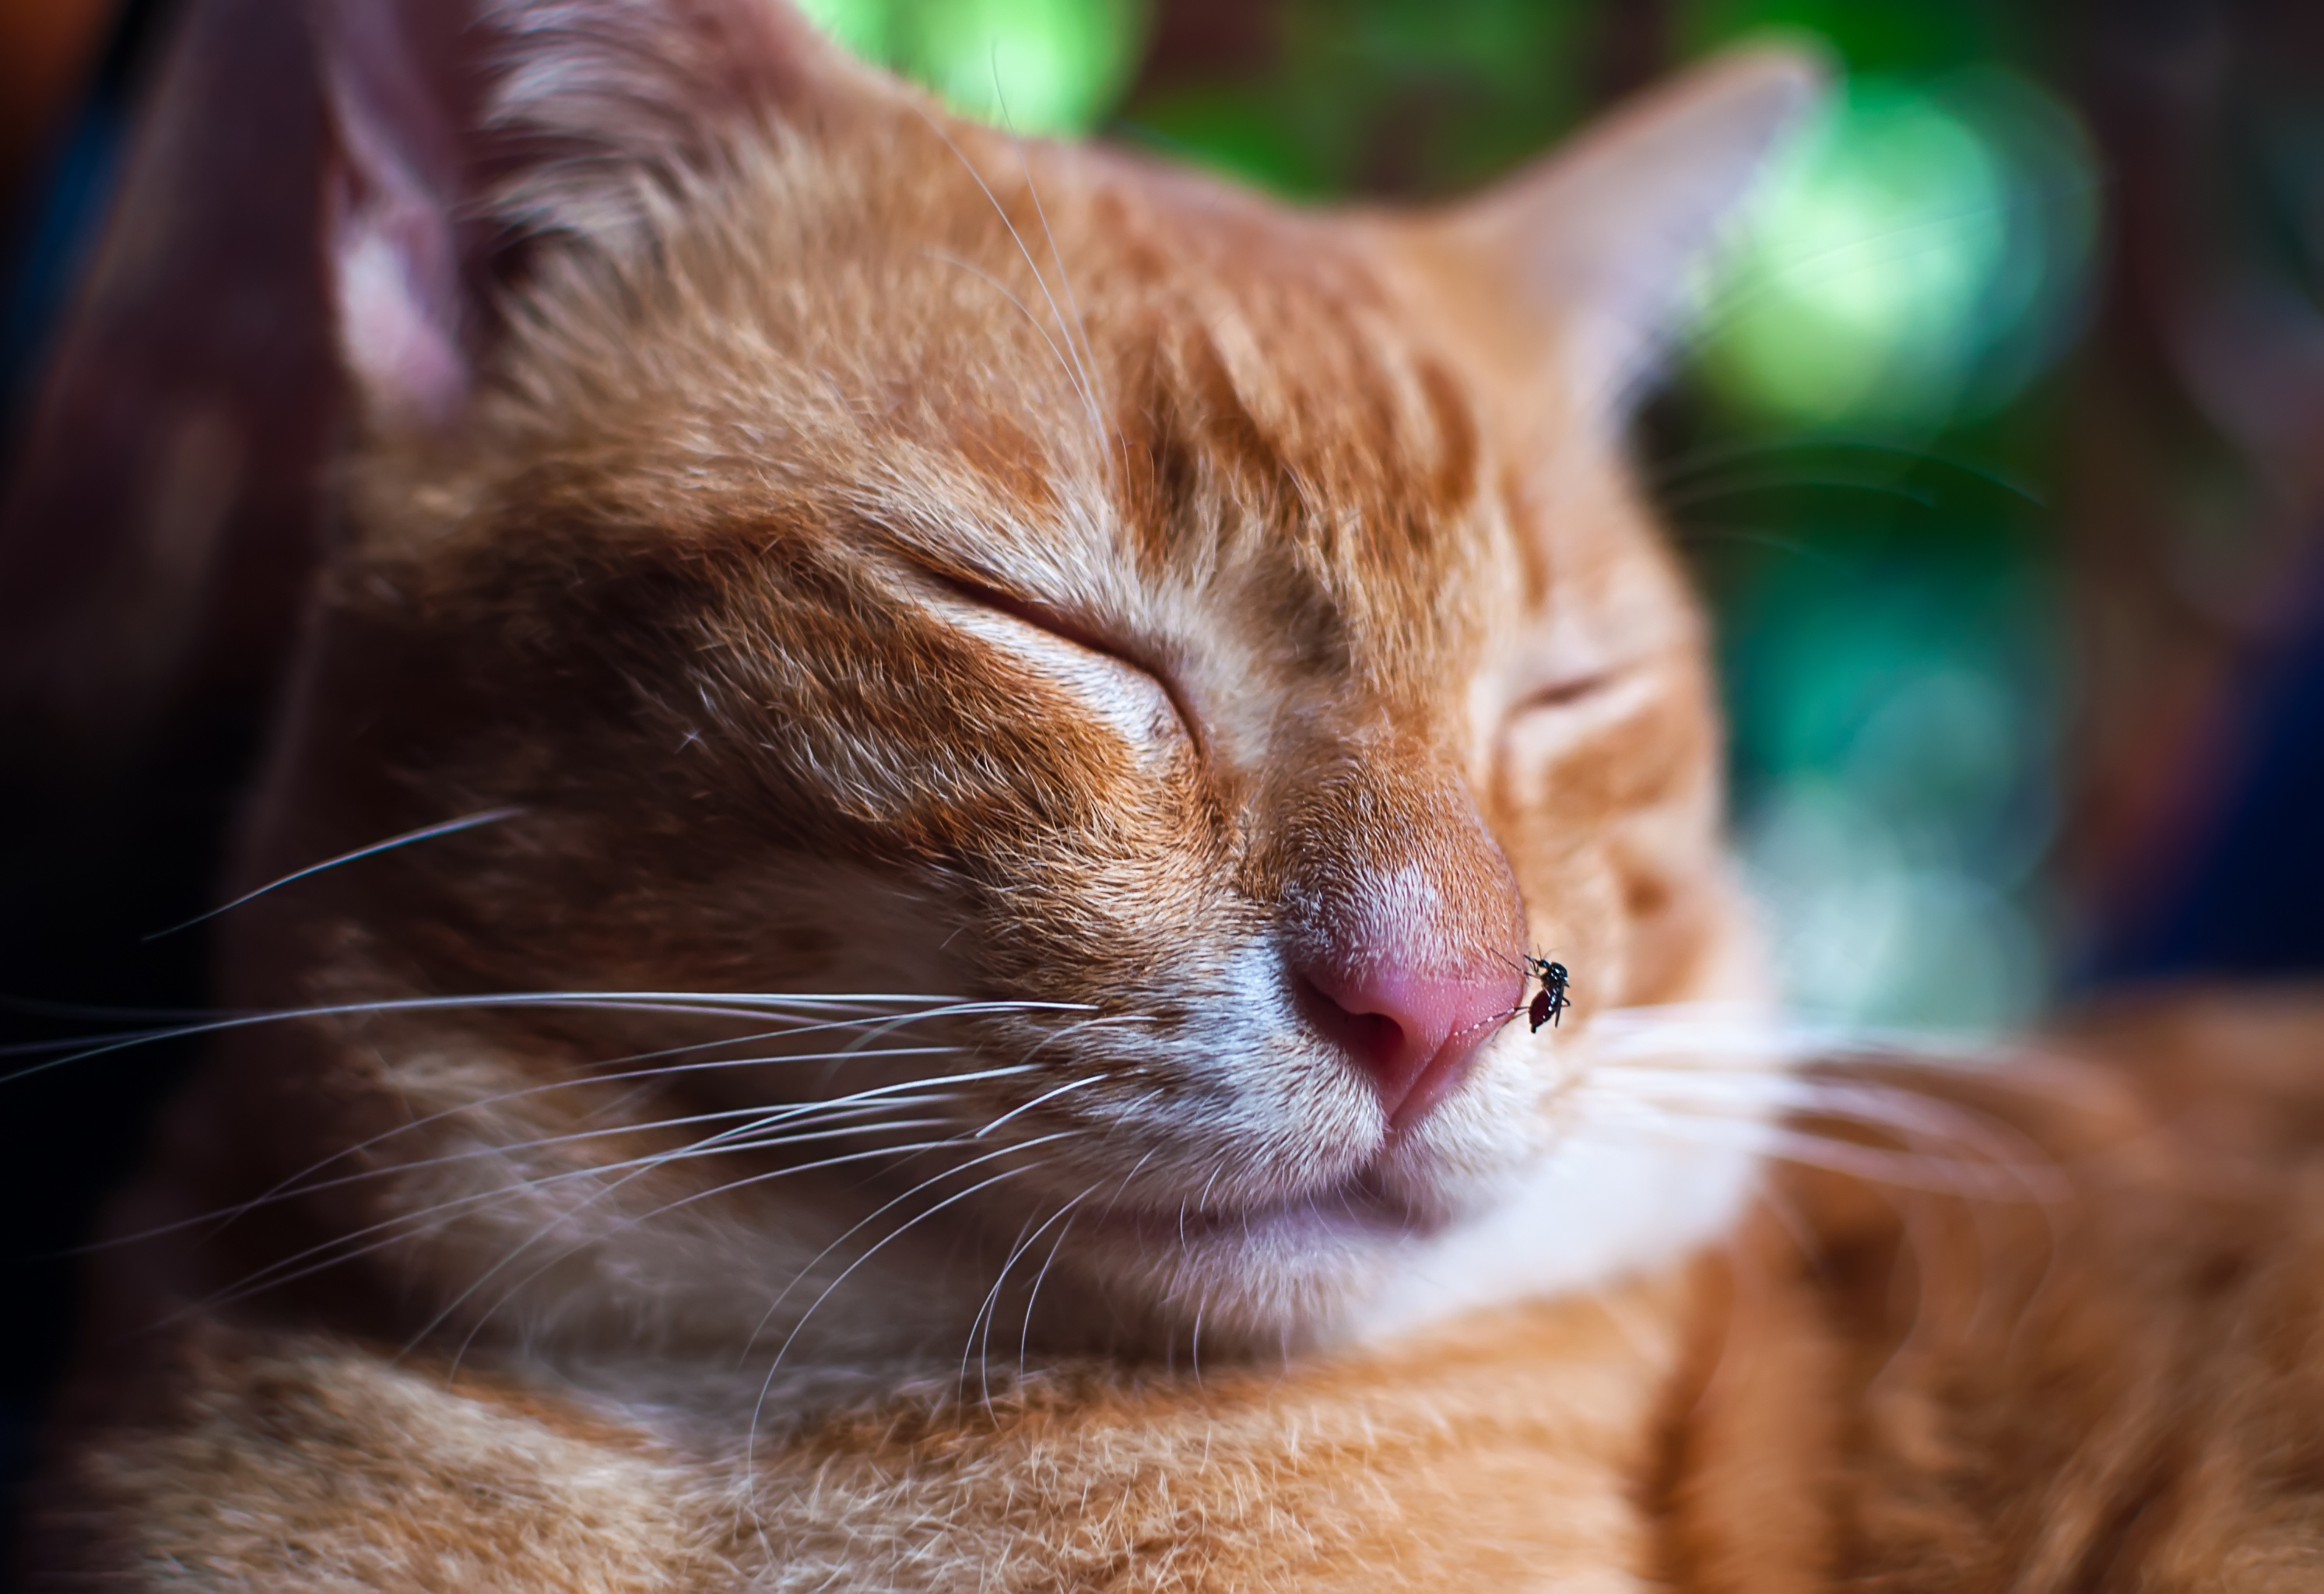 A cat with a mosquito on its nose - protect your pet from mosquitoes with help from GGA Pest Management!